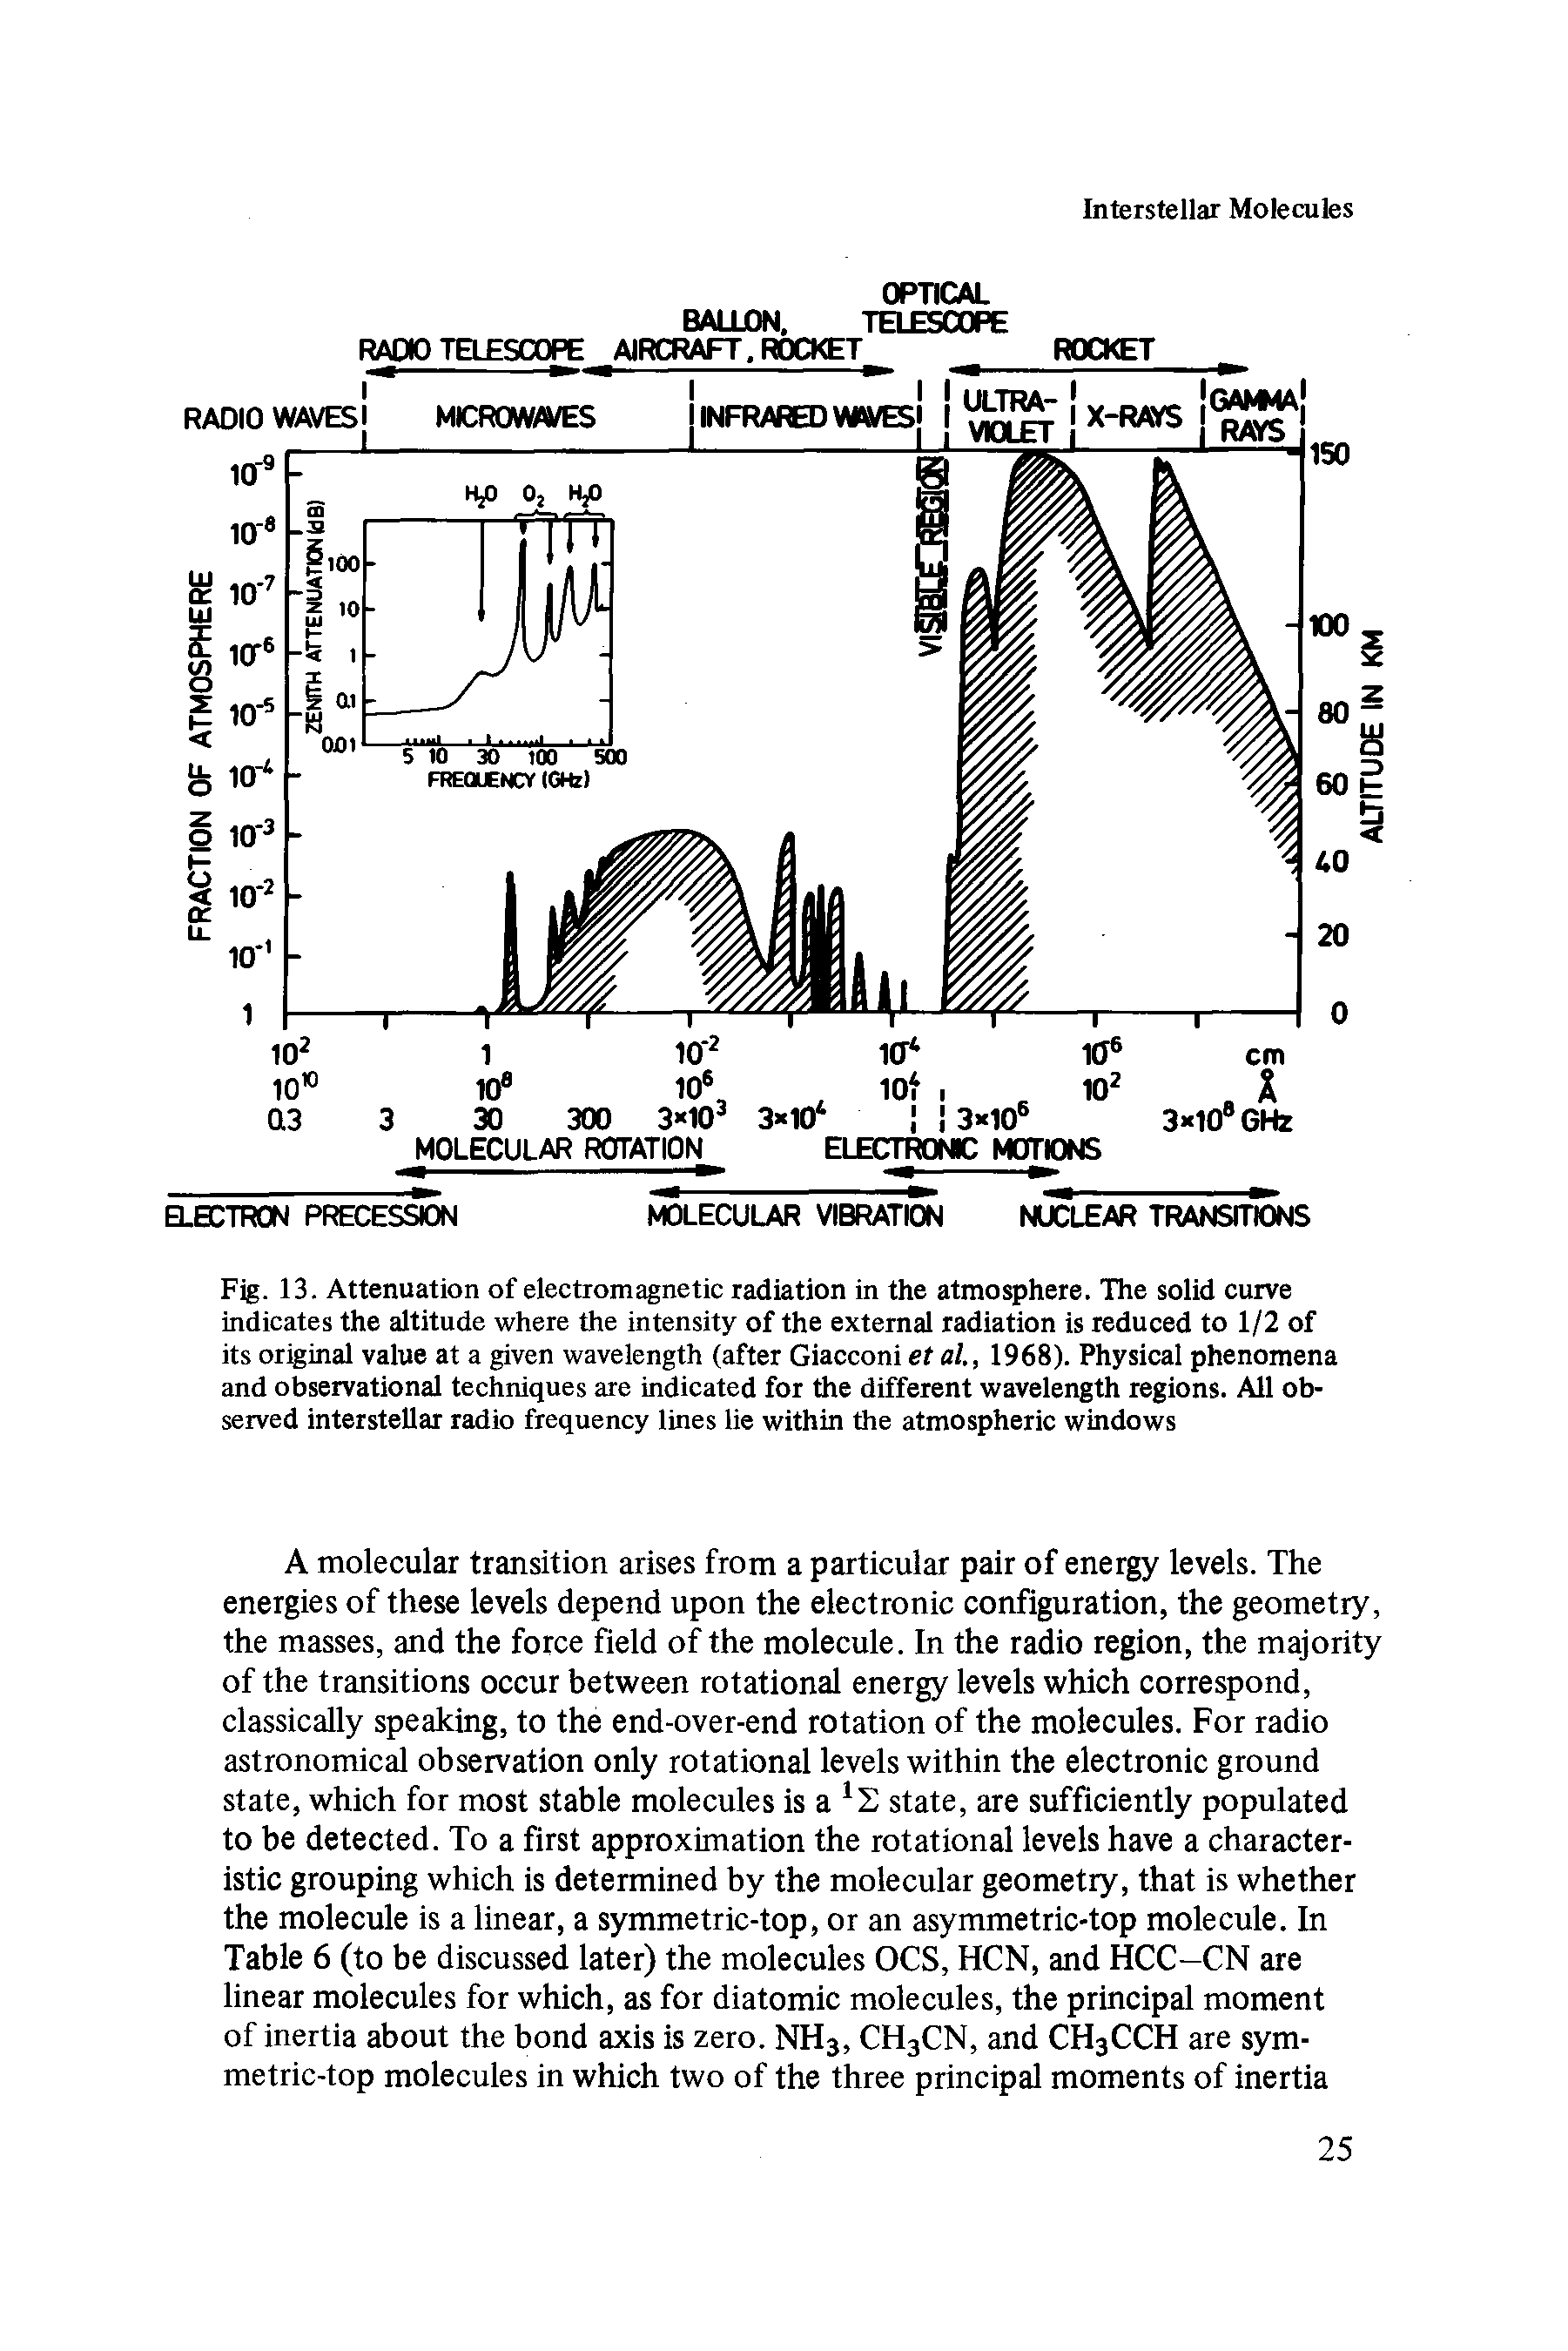 Fig. 13. Attenuation of electromagnetic radiation in the atmosphere. The solid curve indicates the altitude where the intensity of the external radiation is reduced to 1/2 of its original value at a given wavelength (after Giacconi et al., 1968). Physical phenomena and observational techniques are indicated for the different wavelength regions. All observed interstellar radio frequency lines lie within the atmospheric windows...